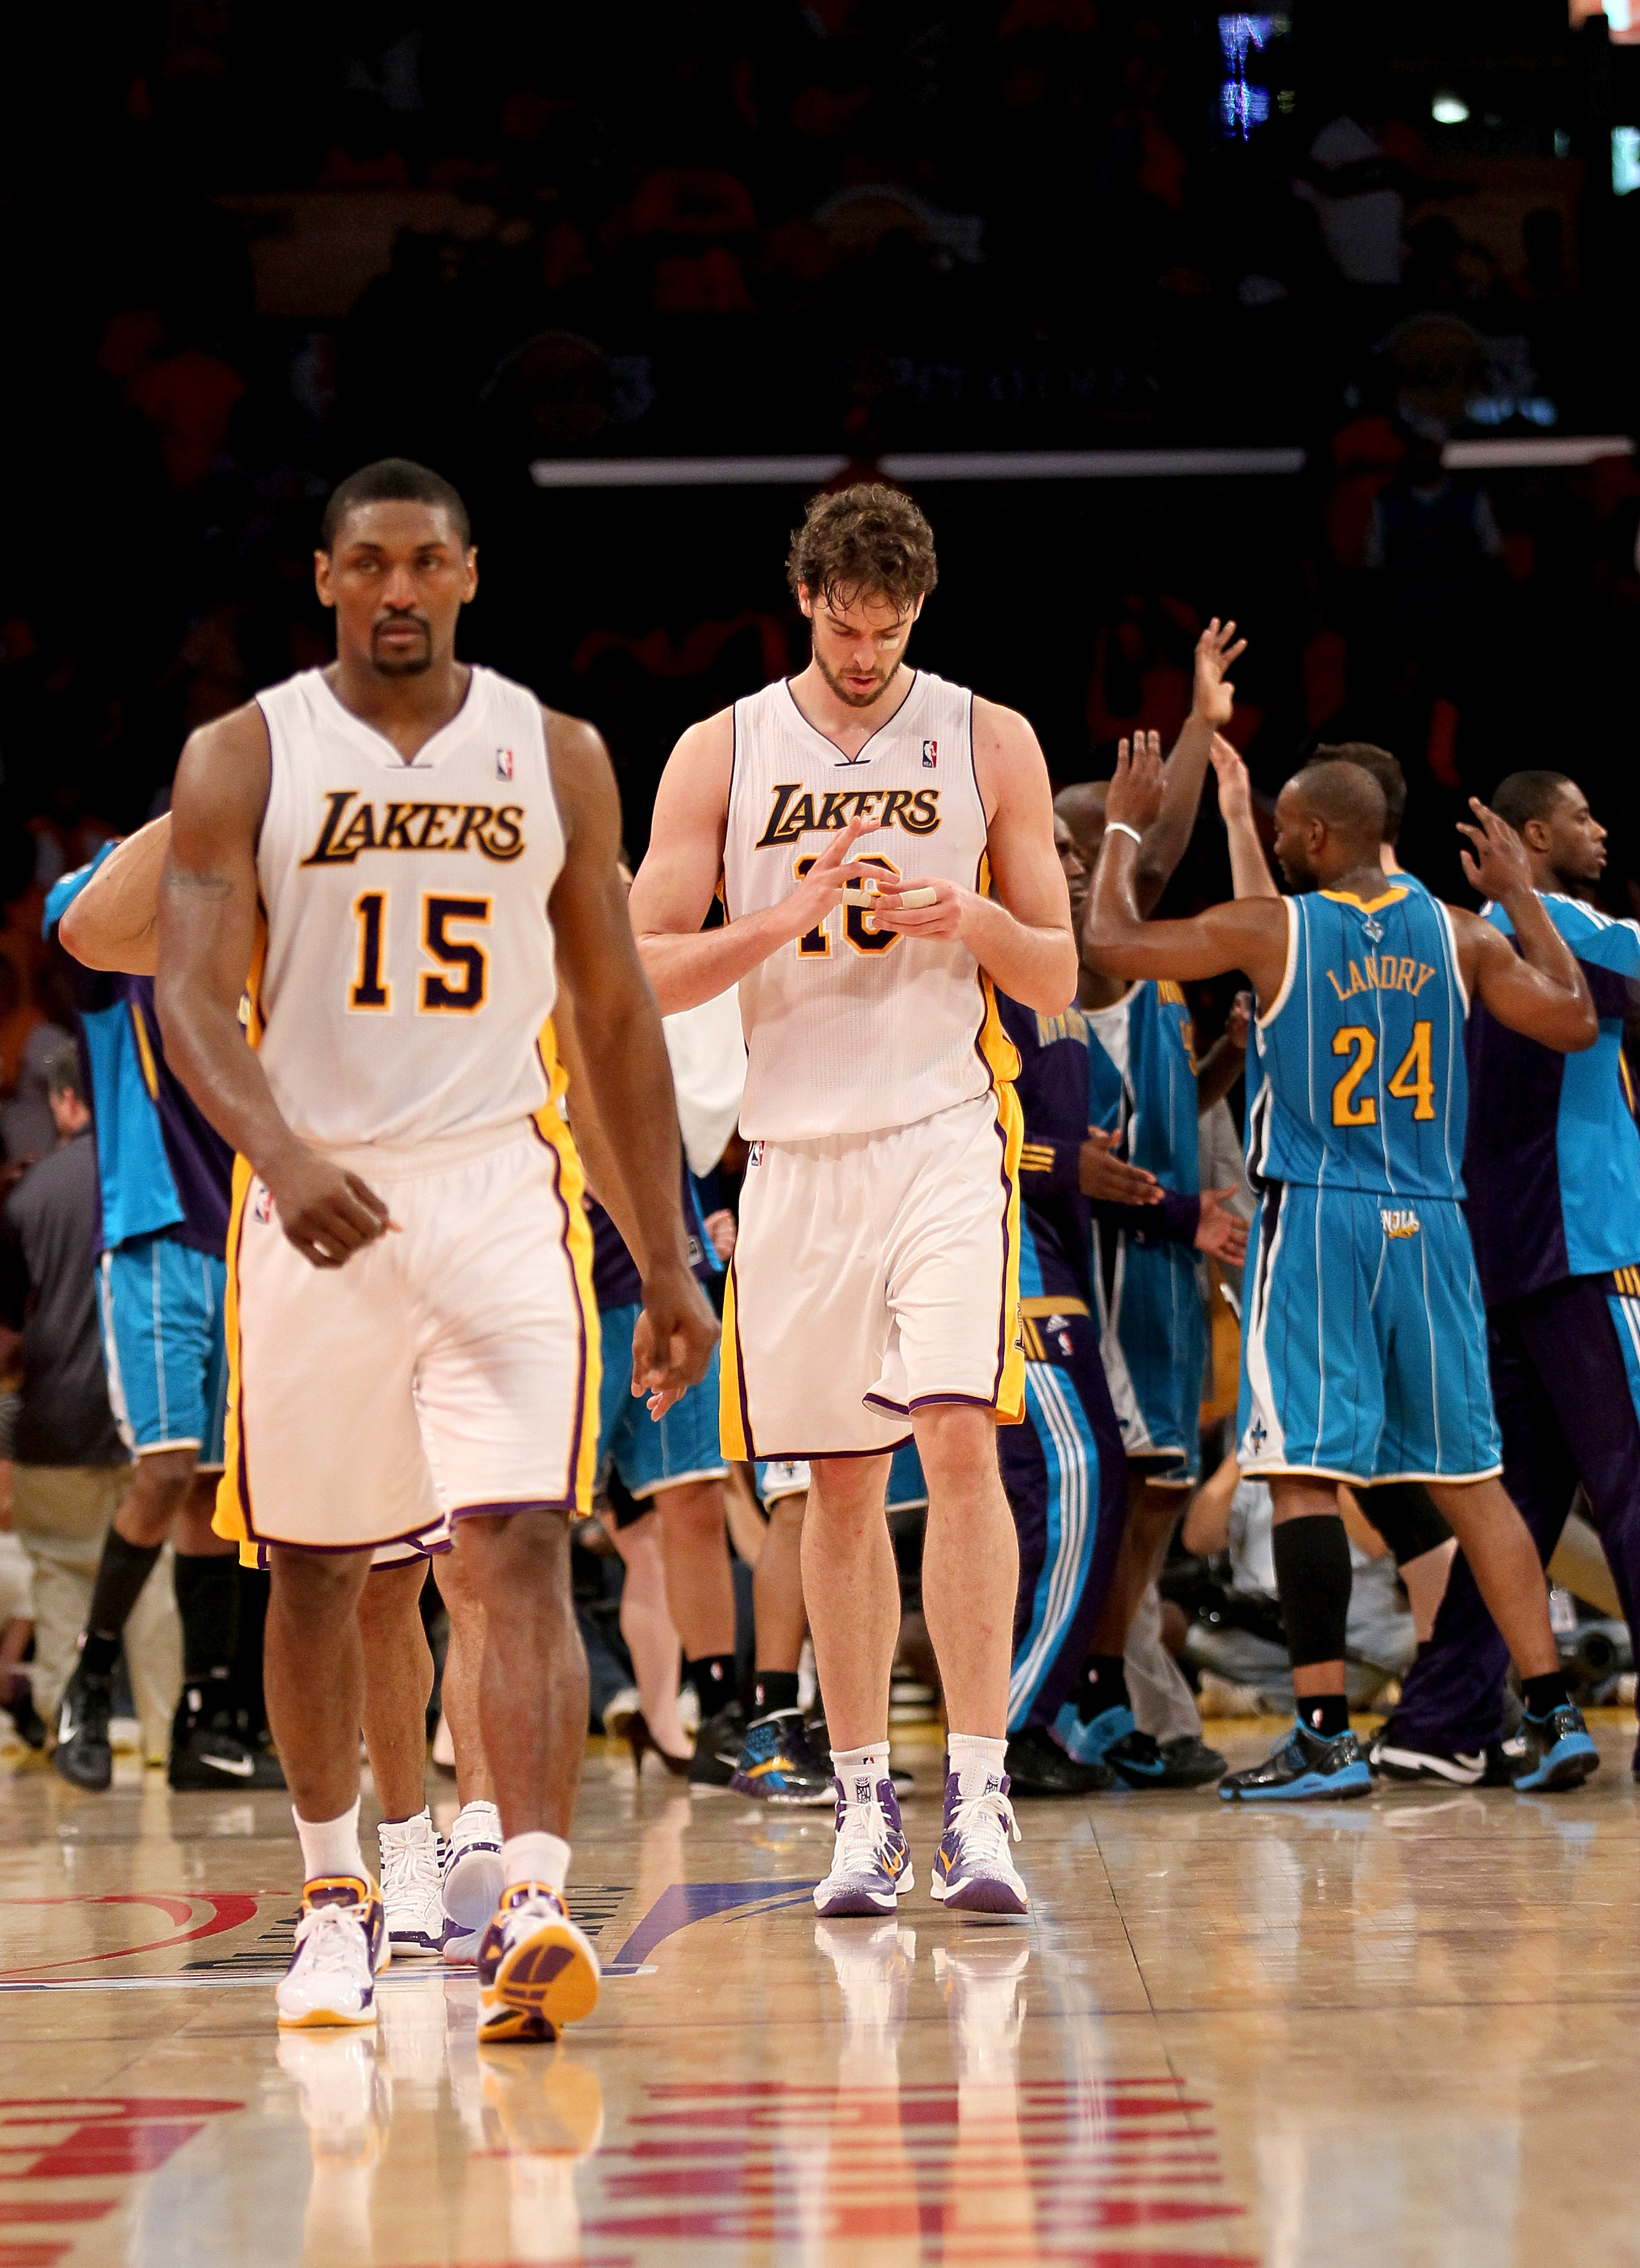 LOS ANGELES, CA - APRIL 17: Pau Gasol #16 and Ron Artest of the Los Angeles Lakers walk off the court as the New Orleans Hornets celebrate after Game One of the Western Conference Quarterfinals in the 2011 NBA Playoffs on April 17, 2011 at Staples Center